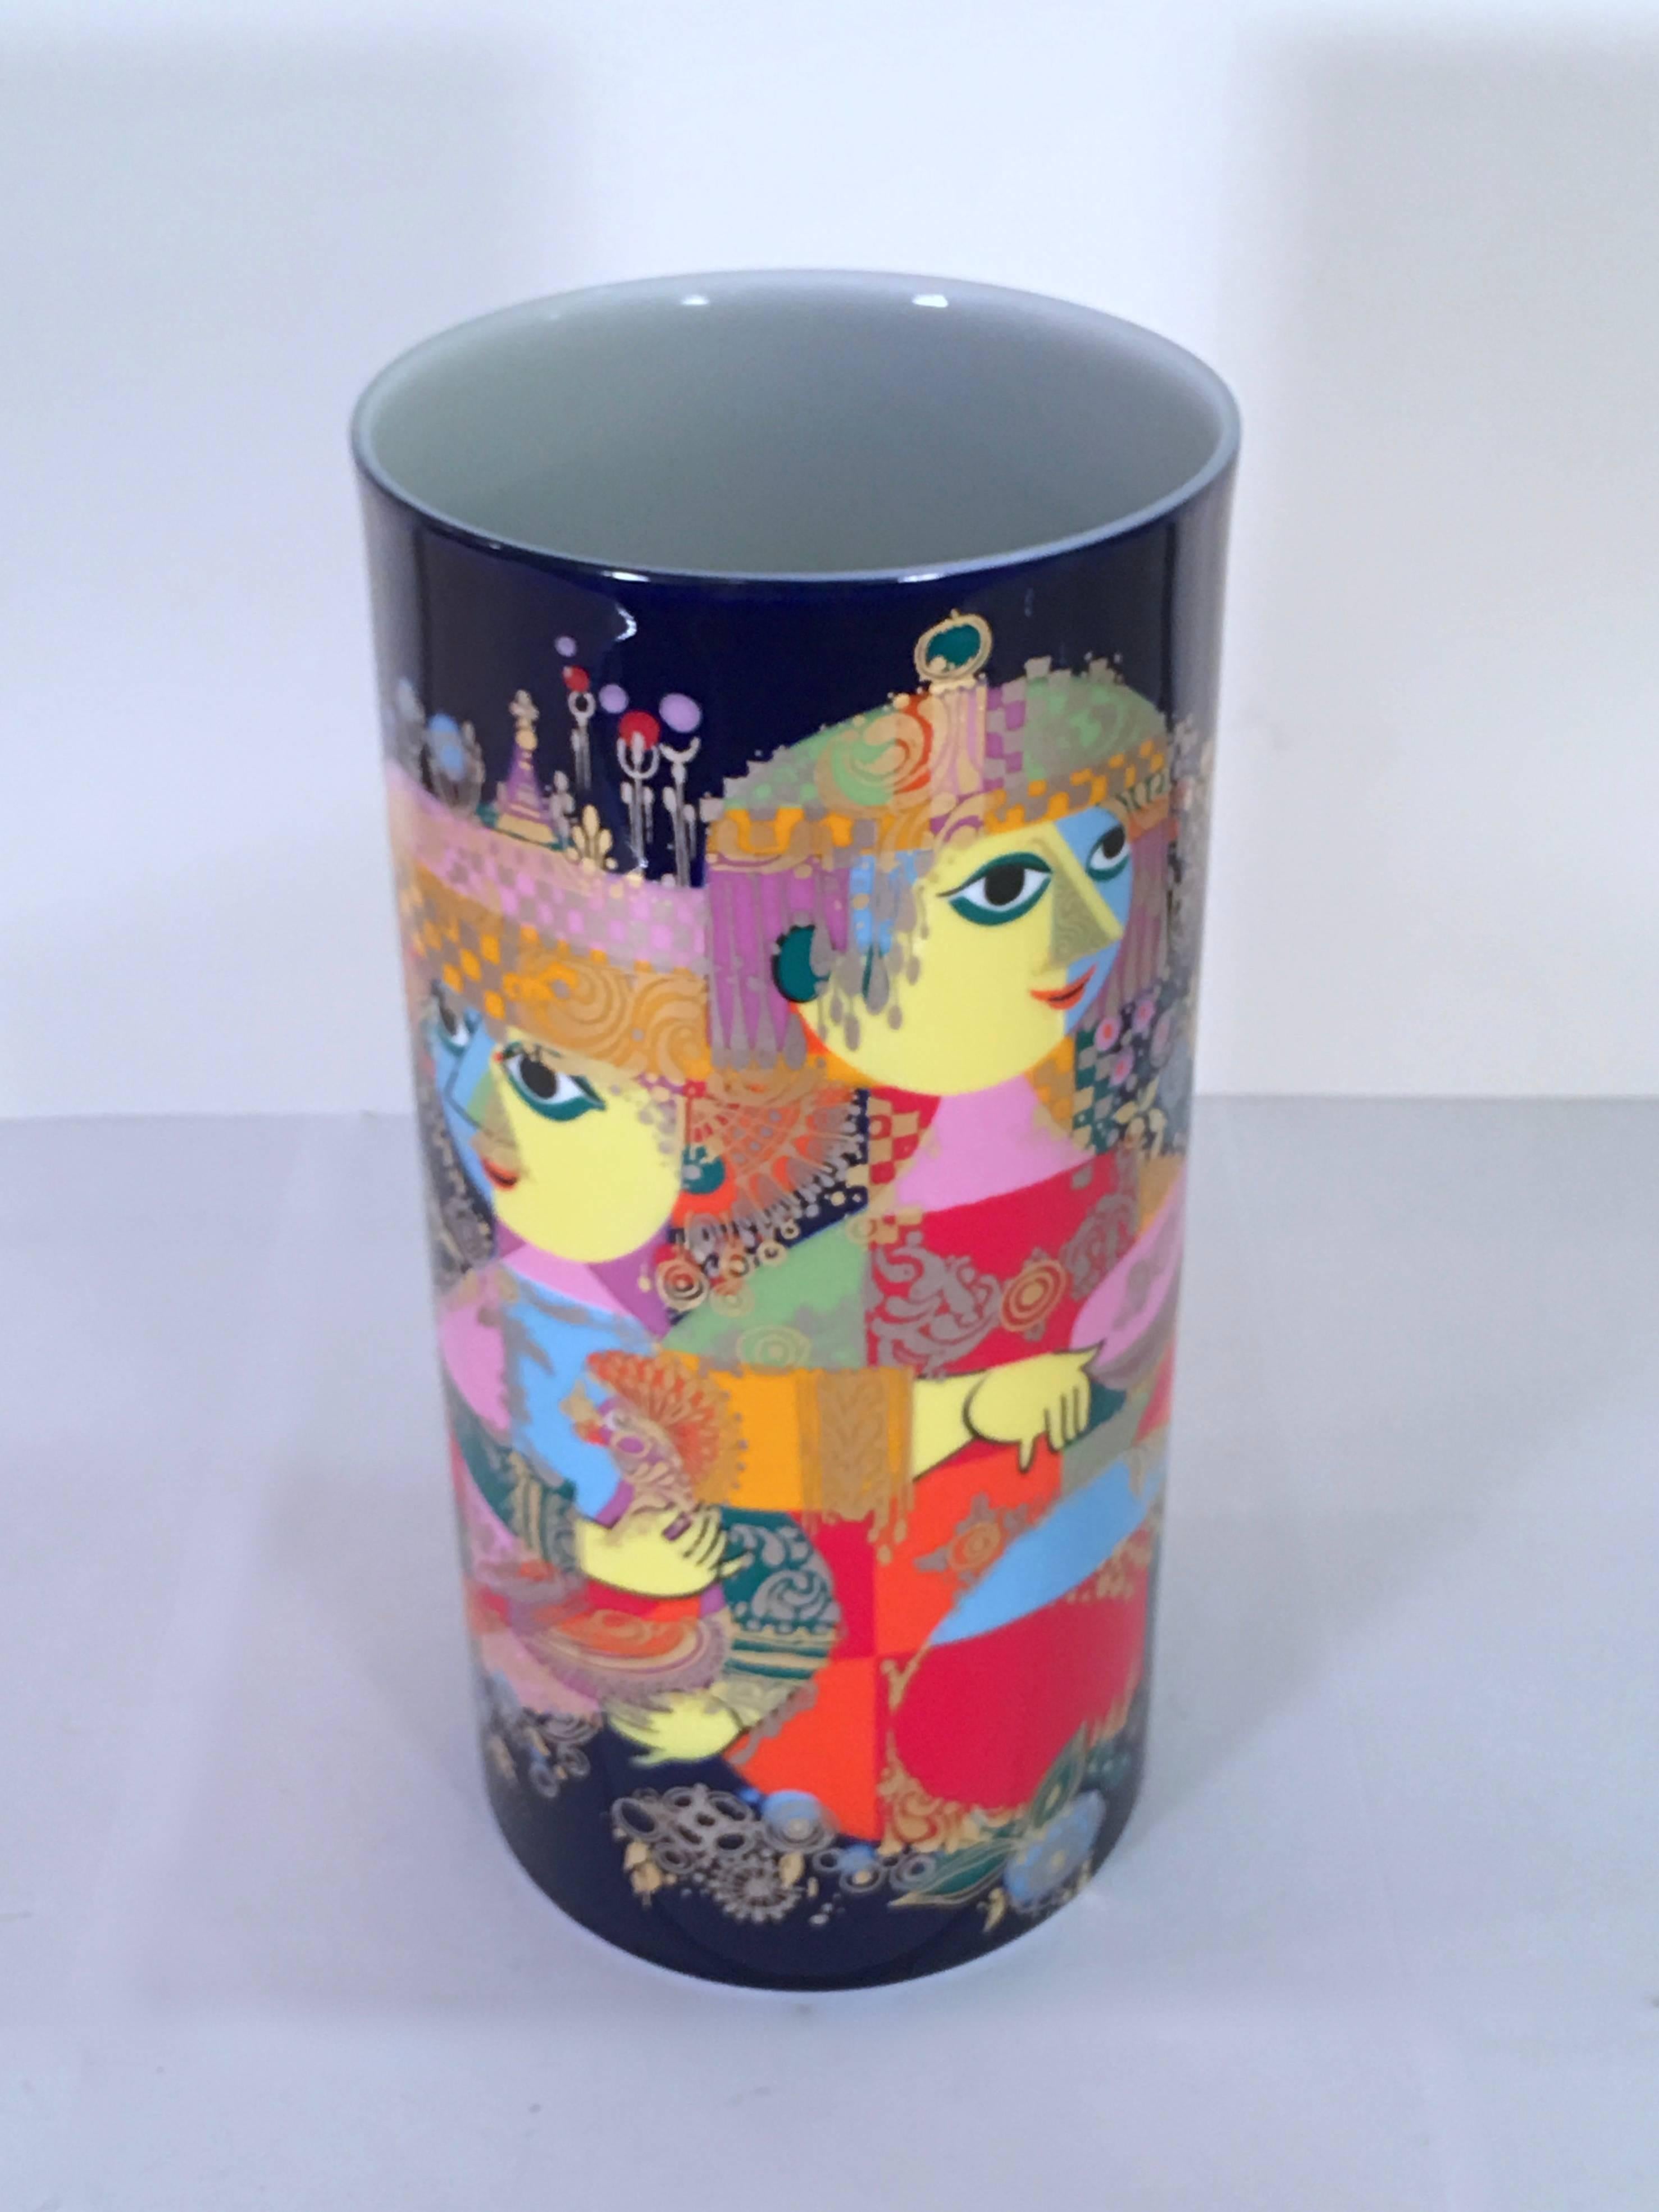 Wonderful vase by Bjorn Wiinblad for Rosenthal from his 1001 nights series. The vase is adorned with gold and jewel like colors, and is a fine example of Wiinblad's charming and magical oeuvre. Please contact for location. 